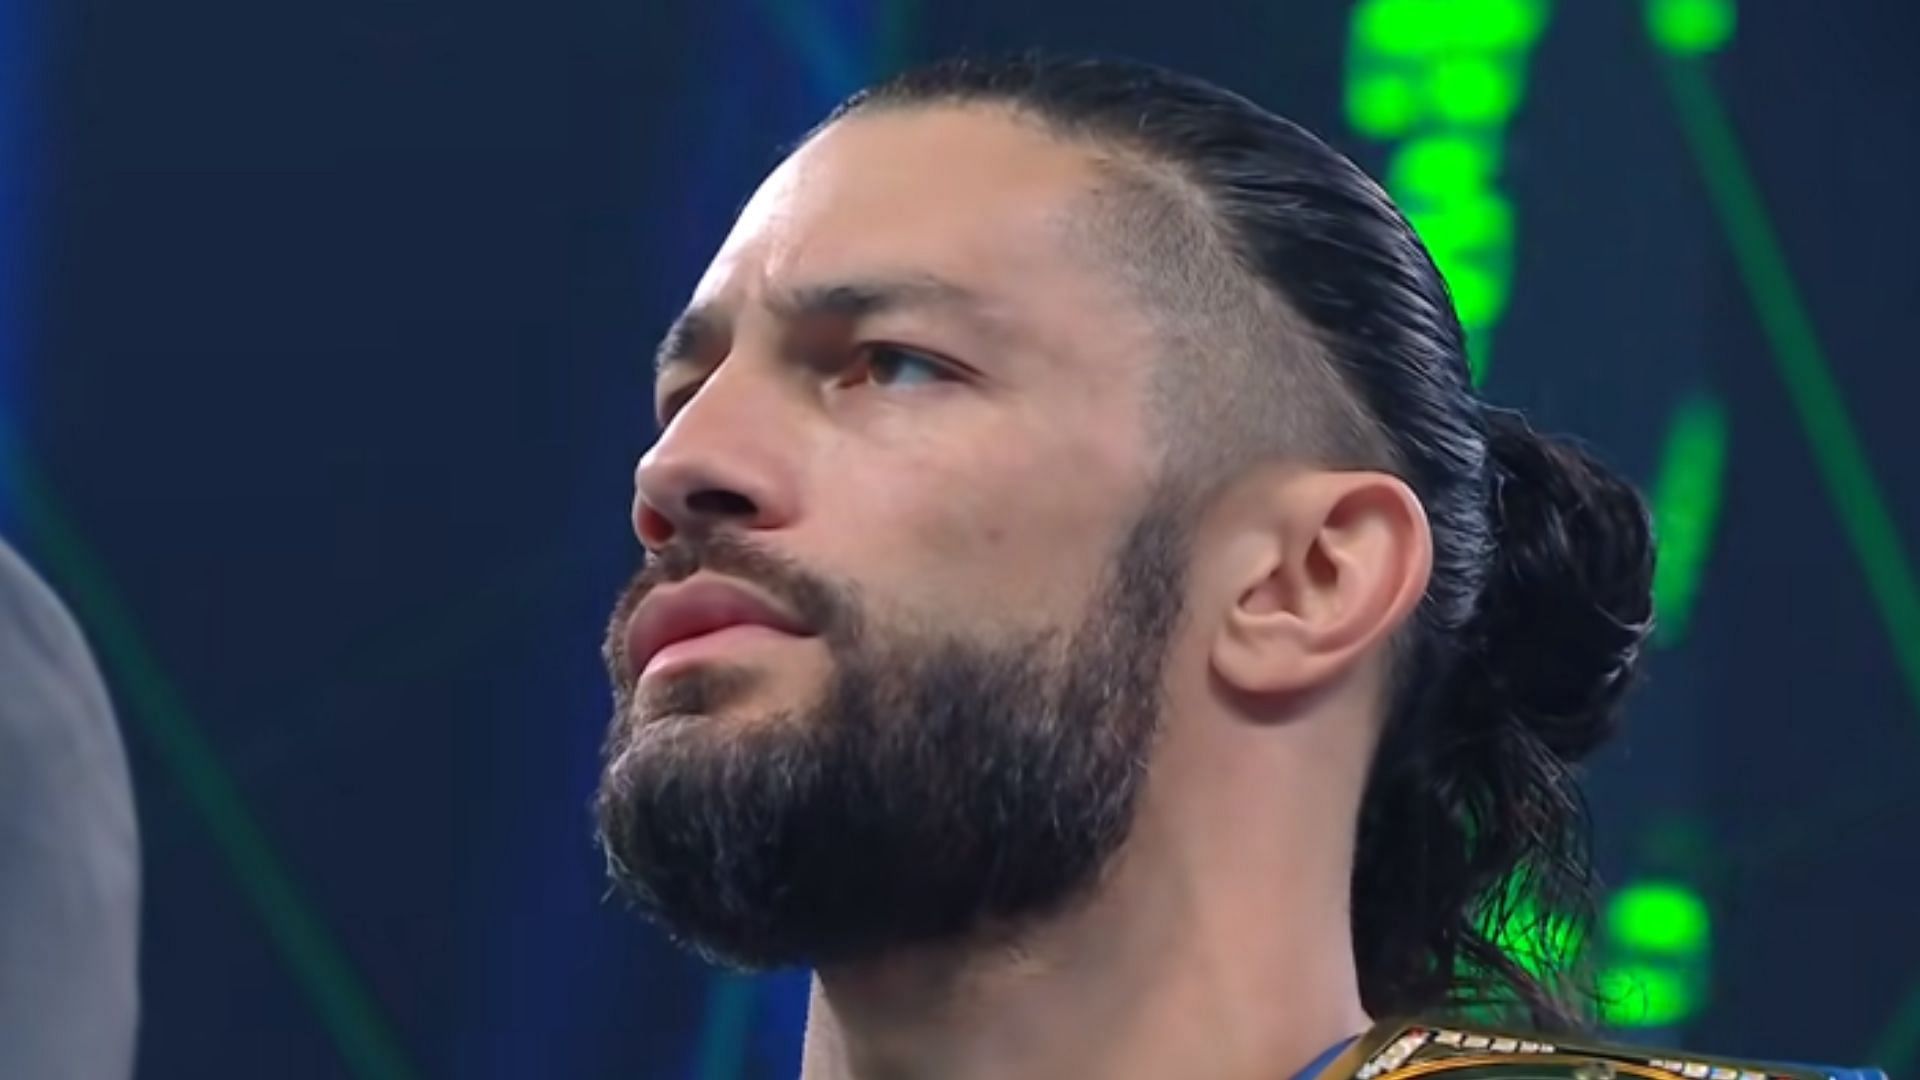 Roman Reigns will face Seth Rollins on January 29